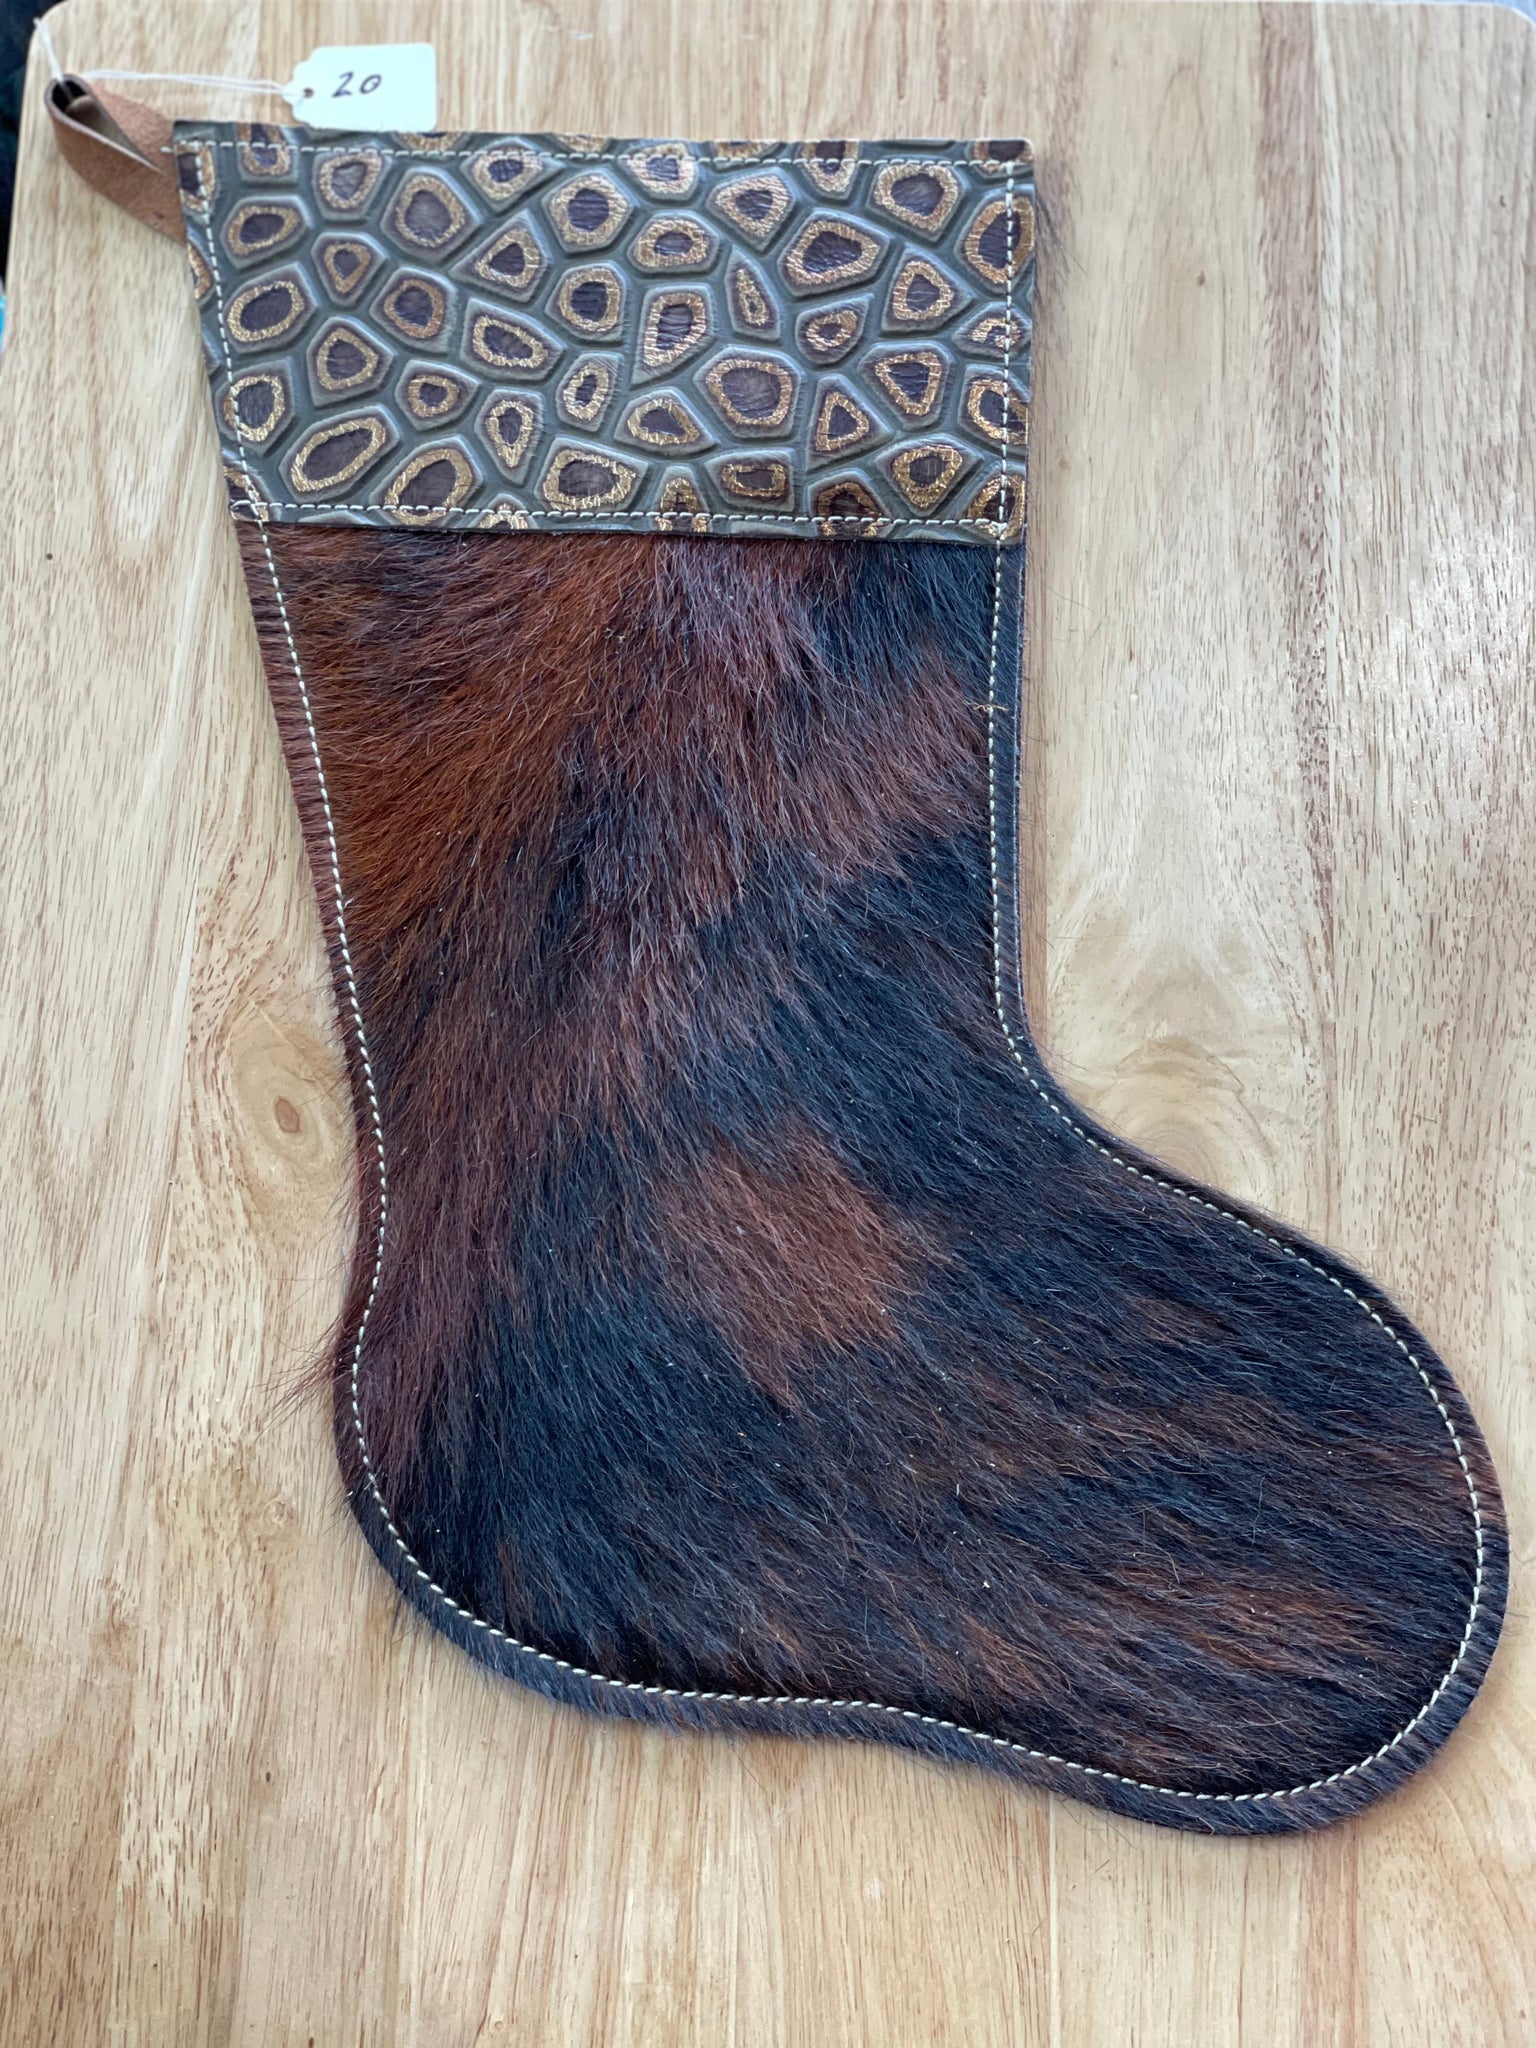 Cowhide and Leather Christmas Stocking #20